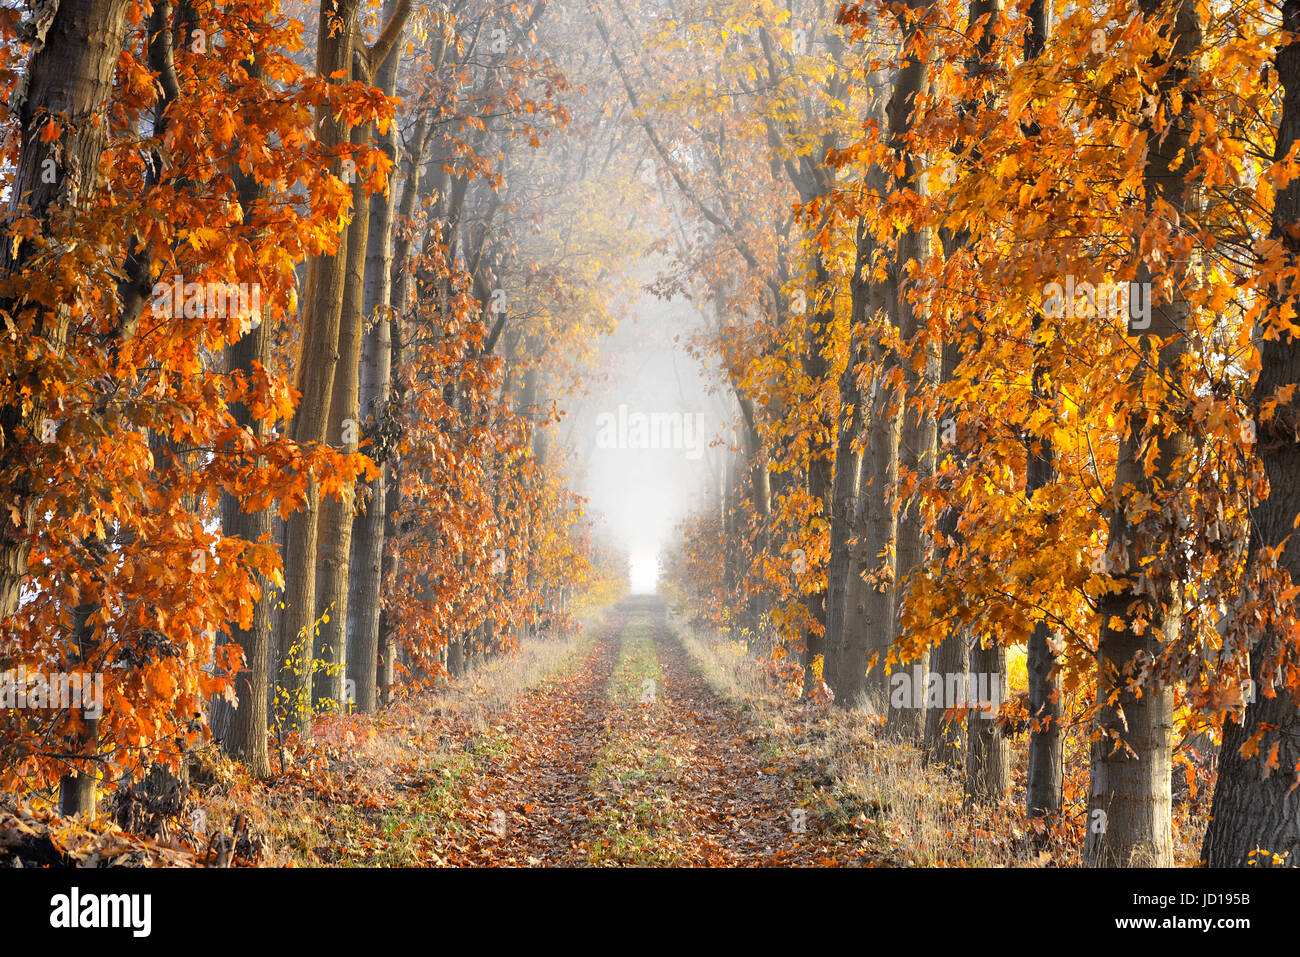 A lane with fallen leaves on the ground bordered by trees in autumn colors showing great perspective and ending in the fog. Stock Photo